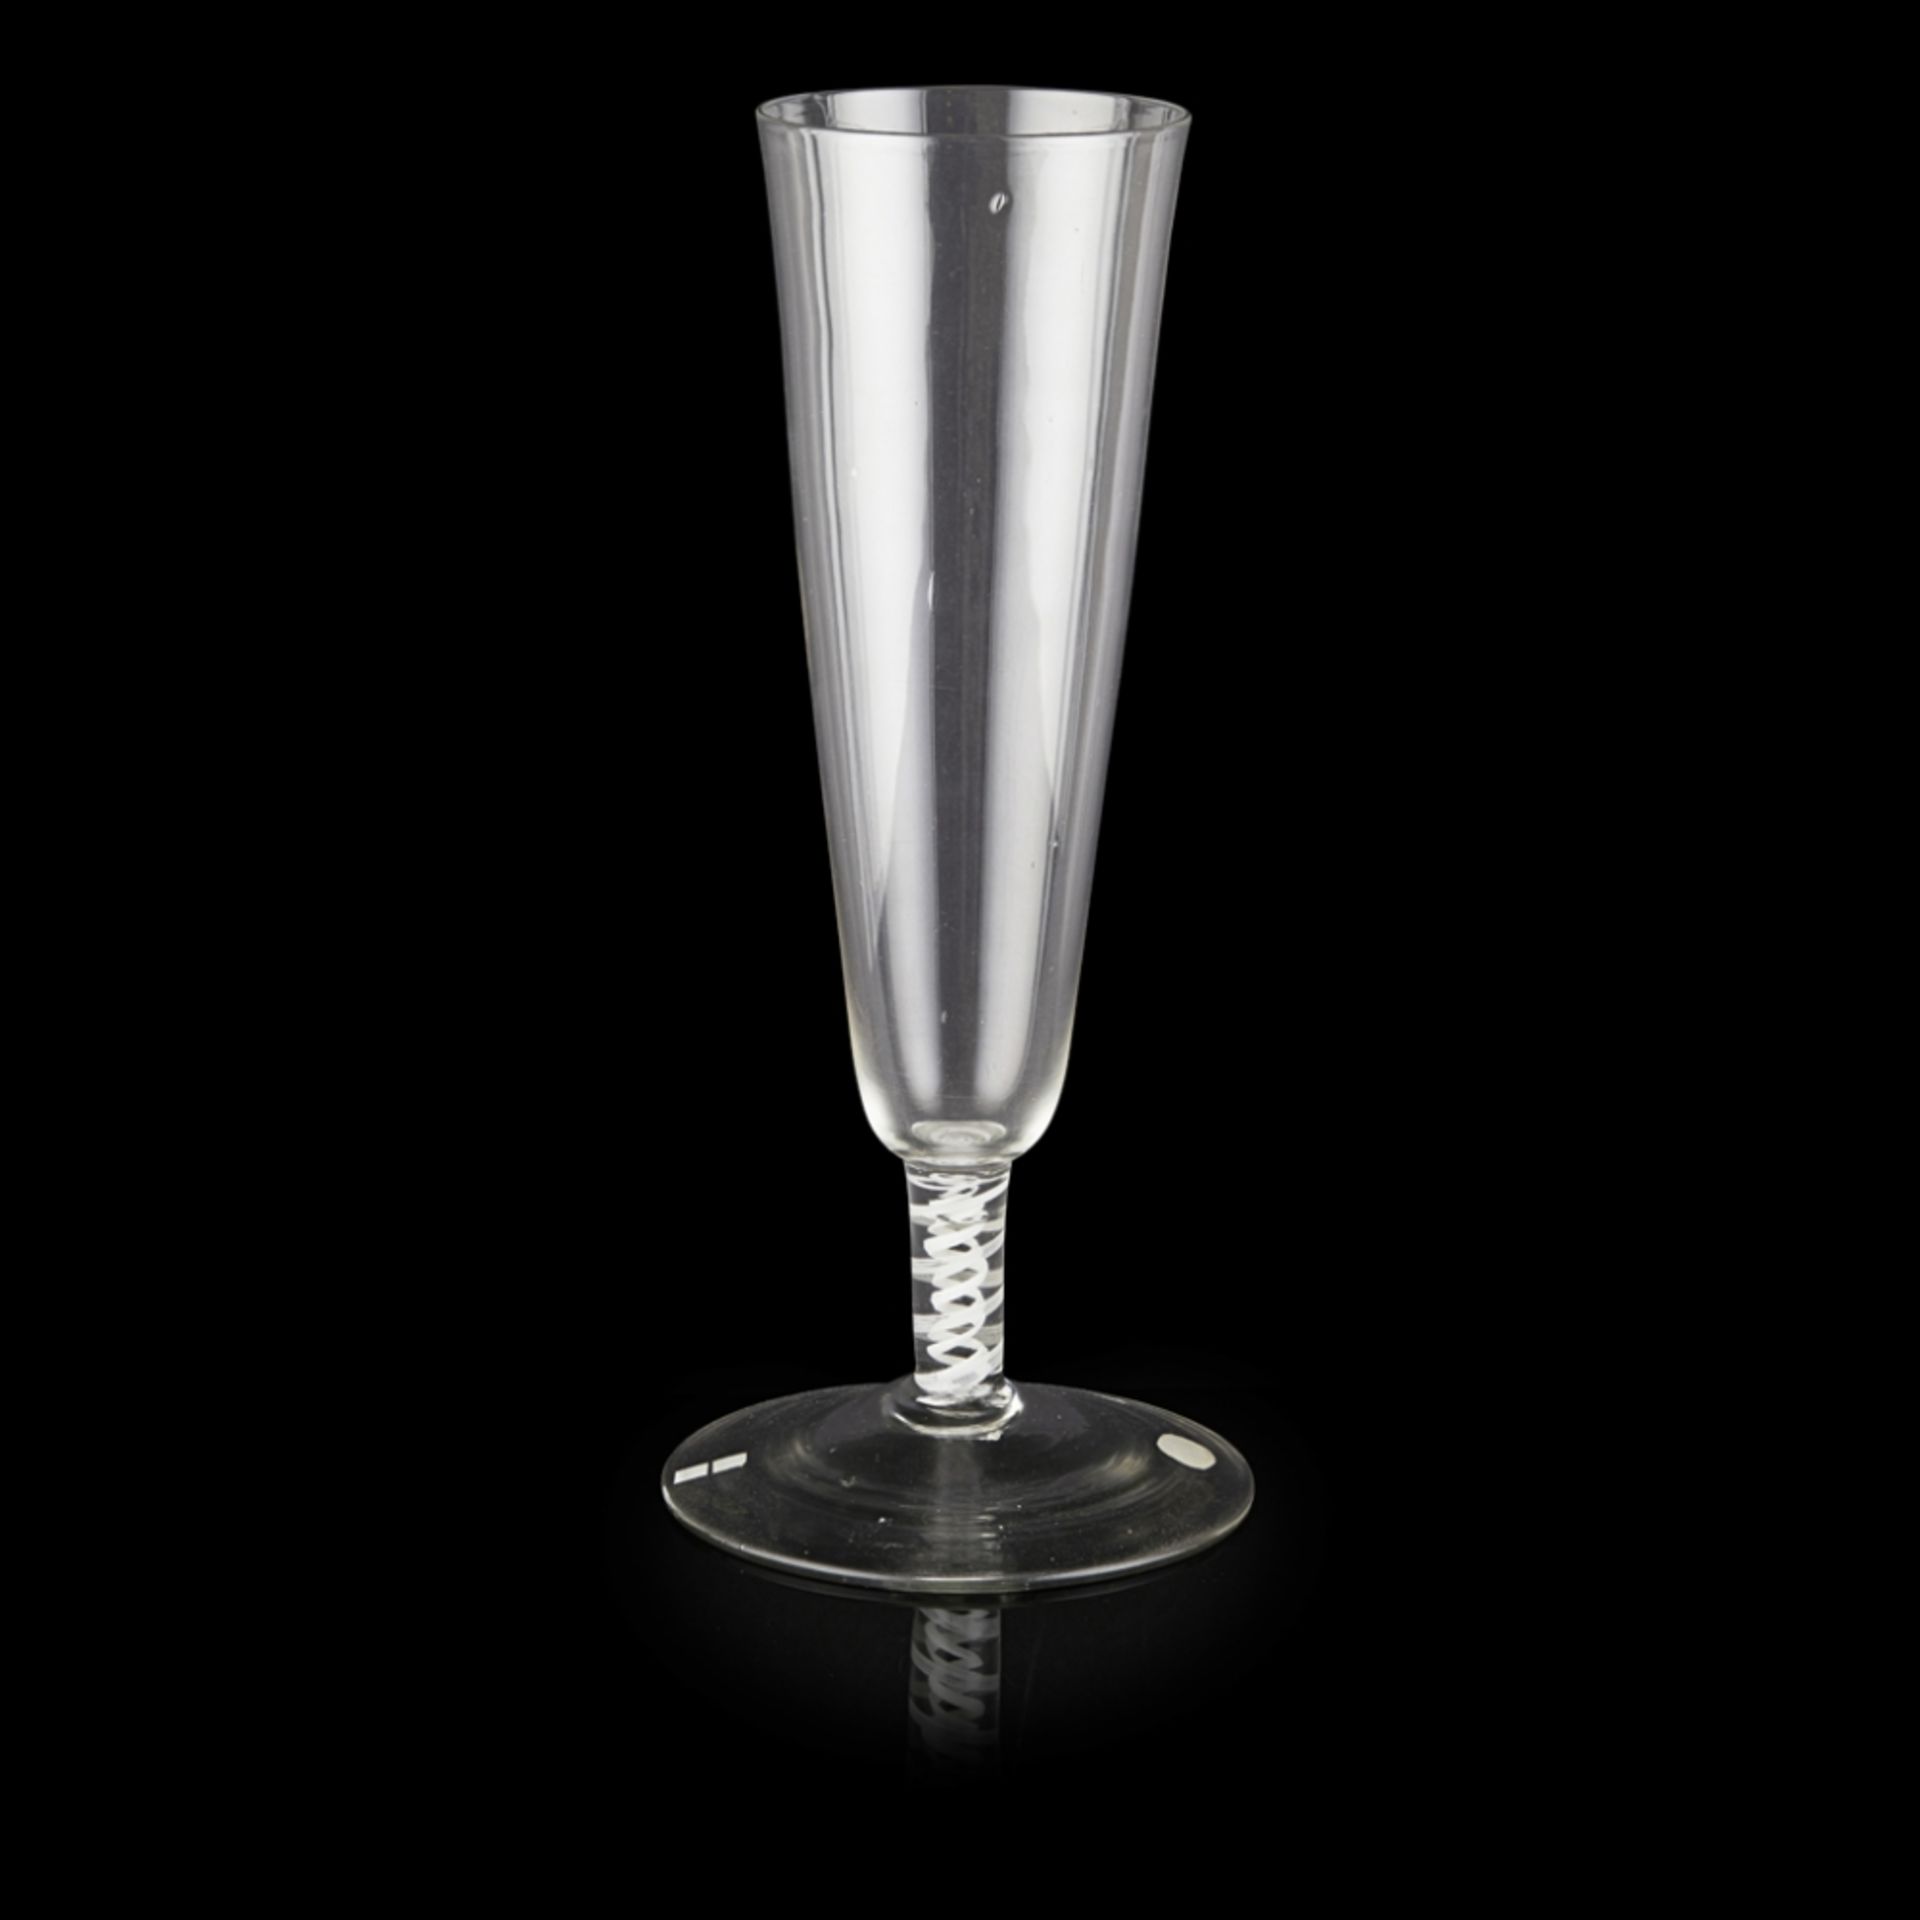 LARGE GEORGIAN OPAQUE-TWIST STEM CAPTAIN'S GLASSCIRCA 1760 with large tapered bowl, above a short